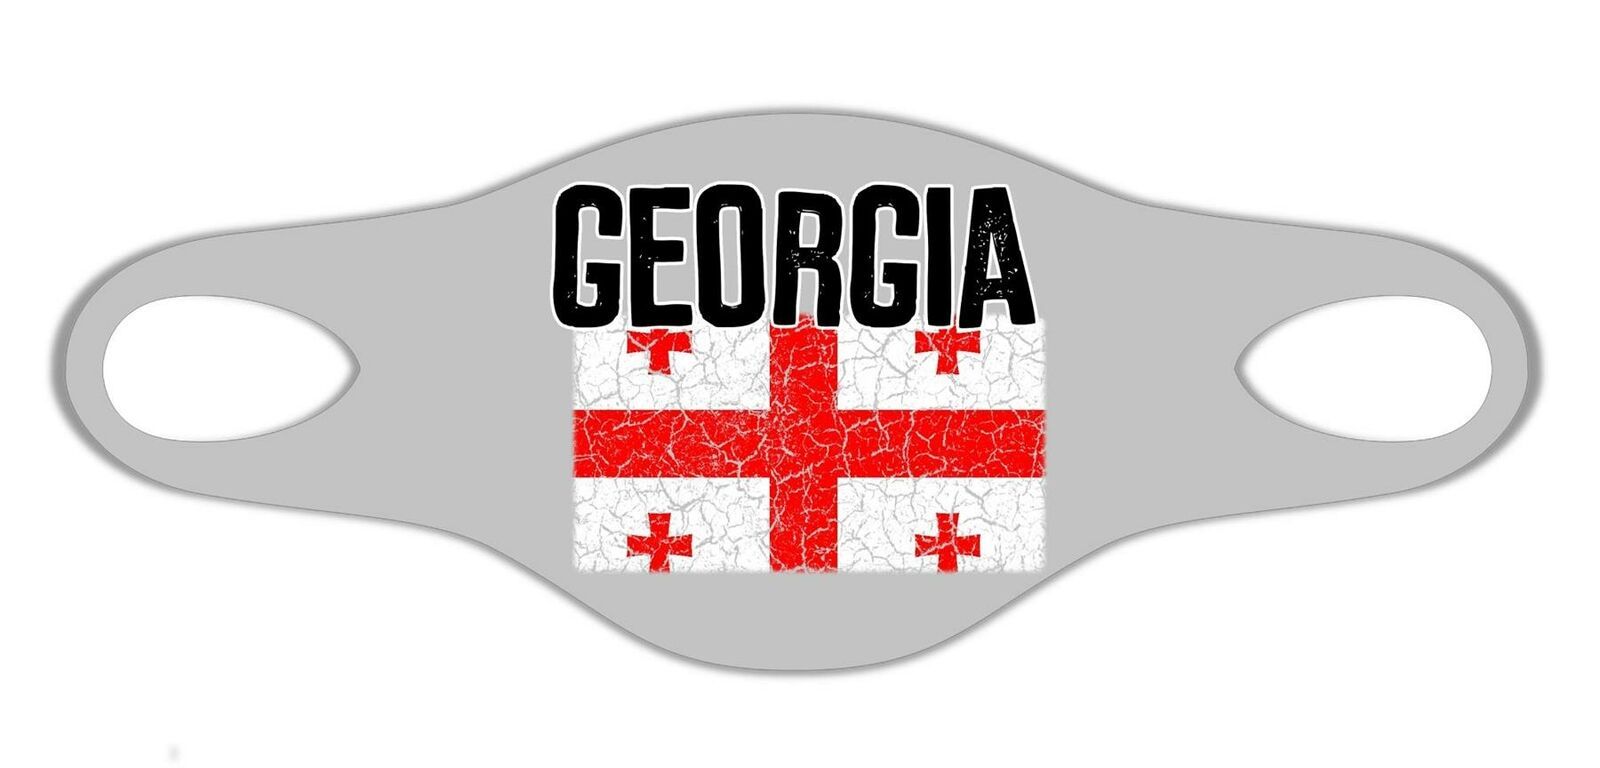 Georgia Patriot Flag Printed Face Mask Protective Reusable Washable Breathable